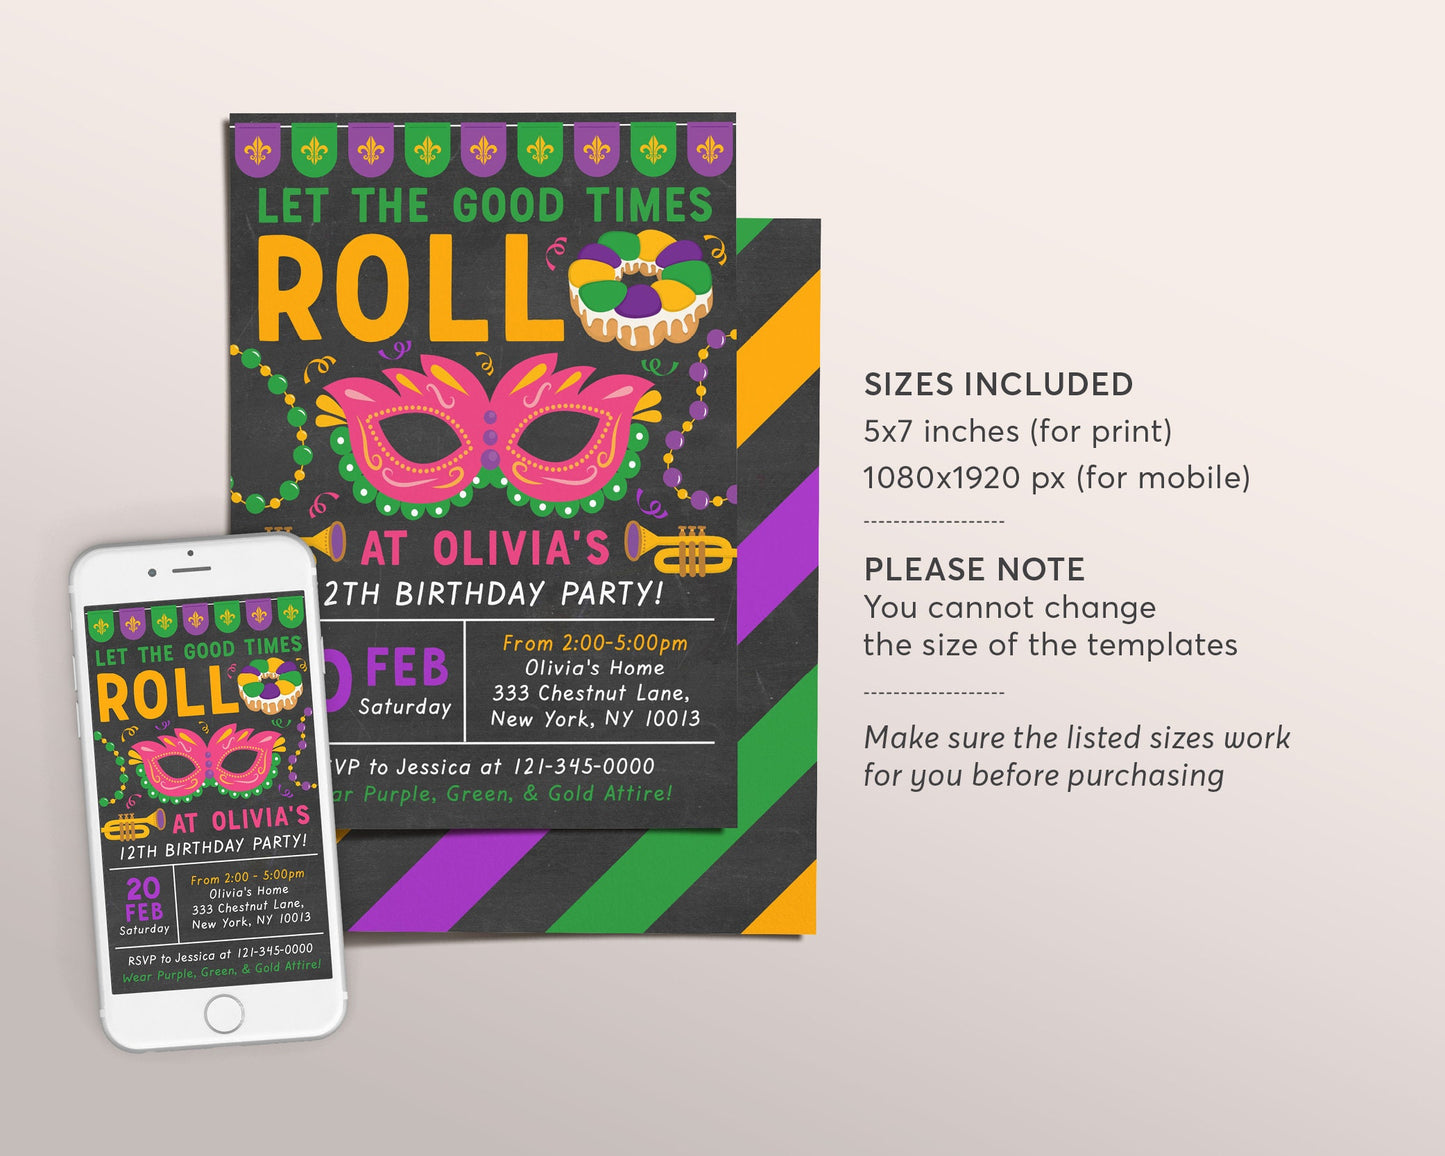 Mardi Gras Birthday Invitation Editable Template, Let The Good Times Roll Masquerade Mask Party Invite Printable, Chalkboard Fat Tuesday